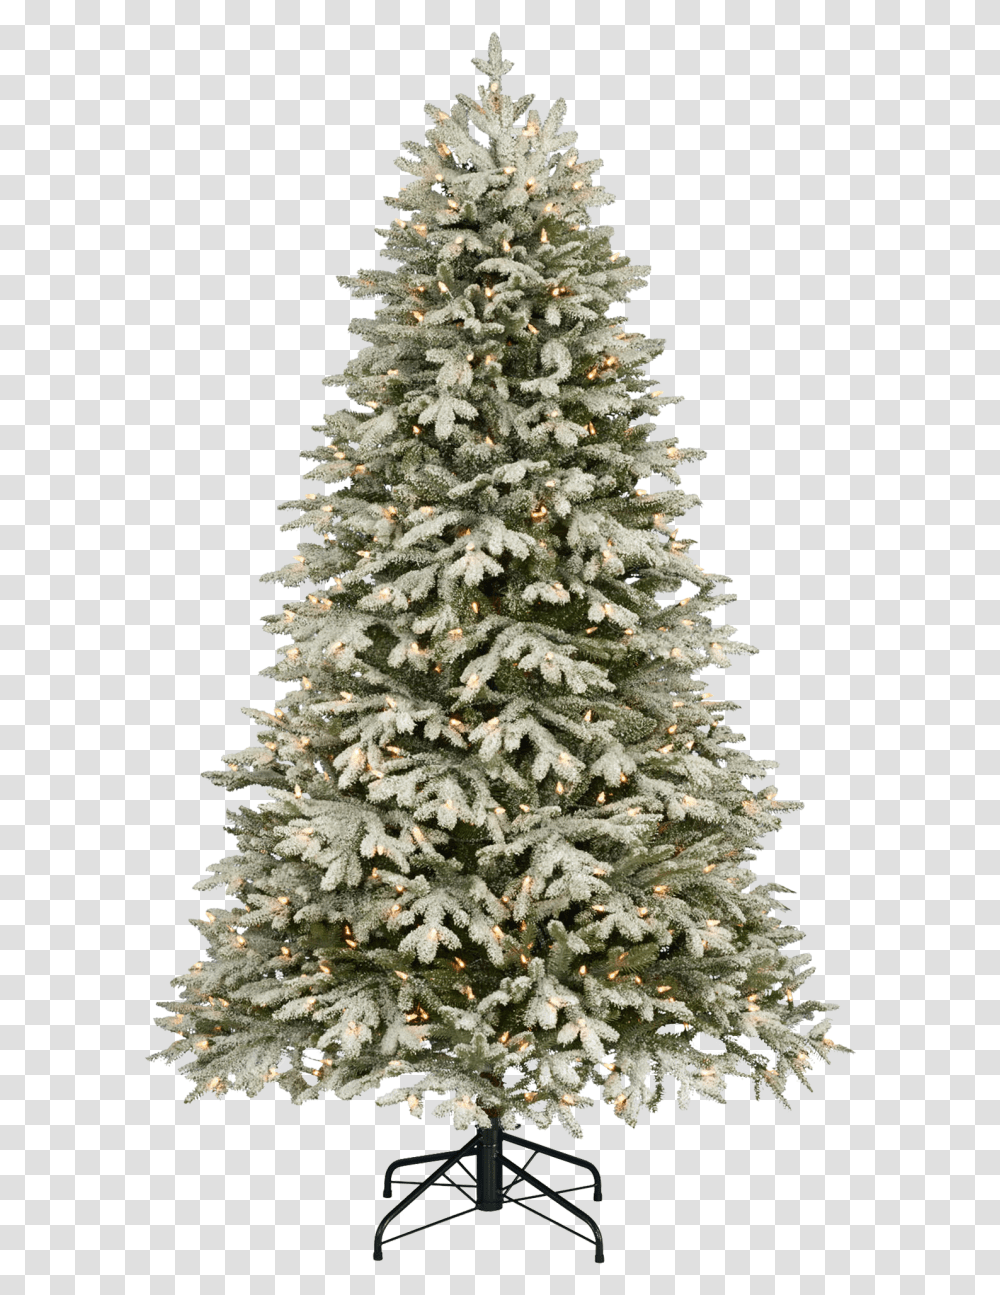 Traditional Christmas Tree With Snow Image Frosted Christmas Tree, Ornament, Plant, Pine, Fir Transparent Png